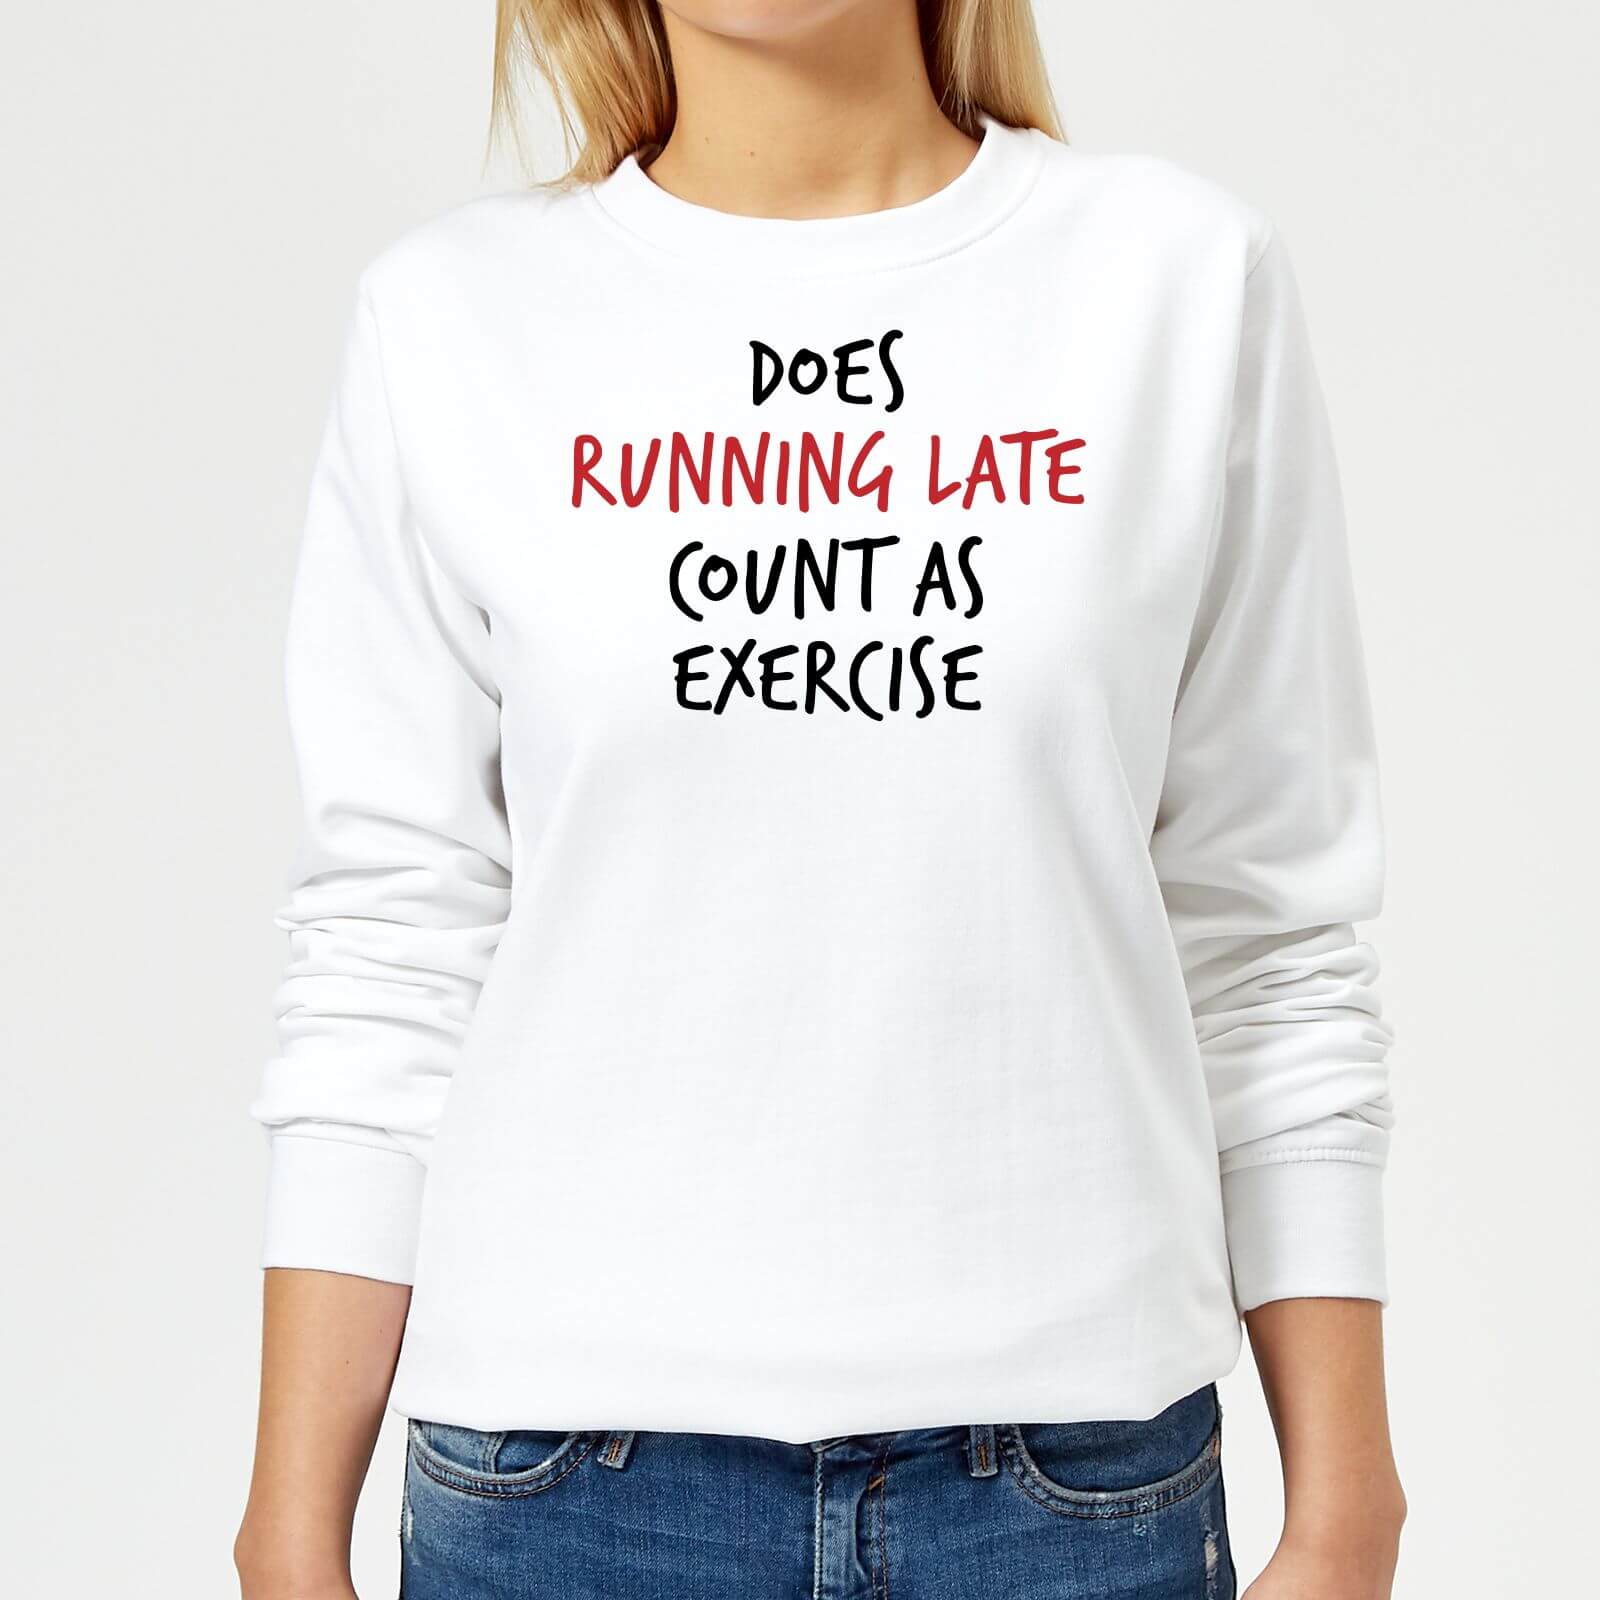 Does Running Late Count as Exercise Women's Sweatshirt - White - M - White